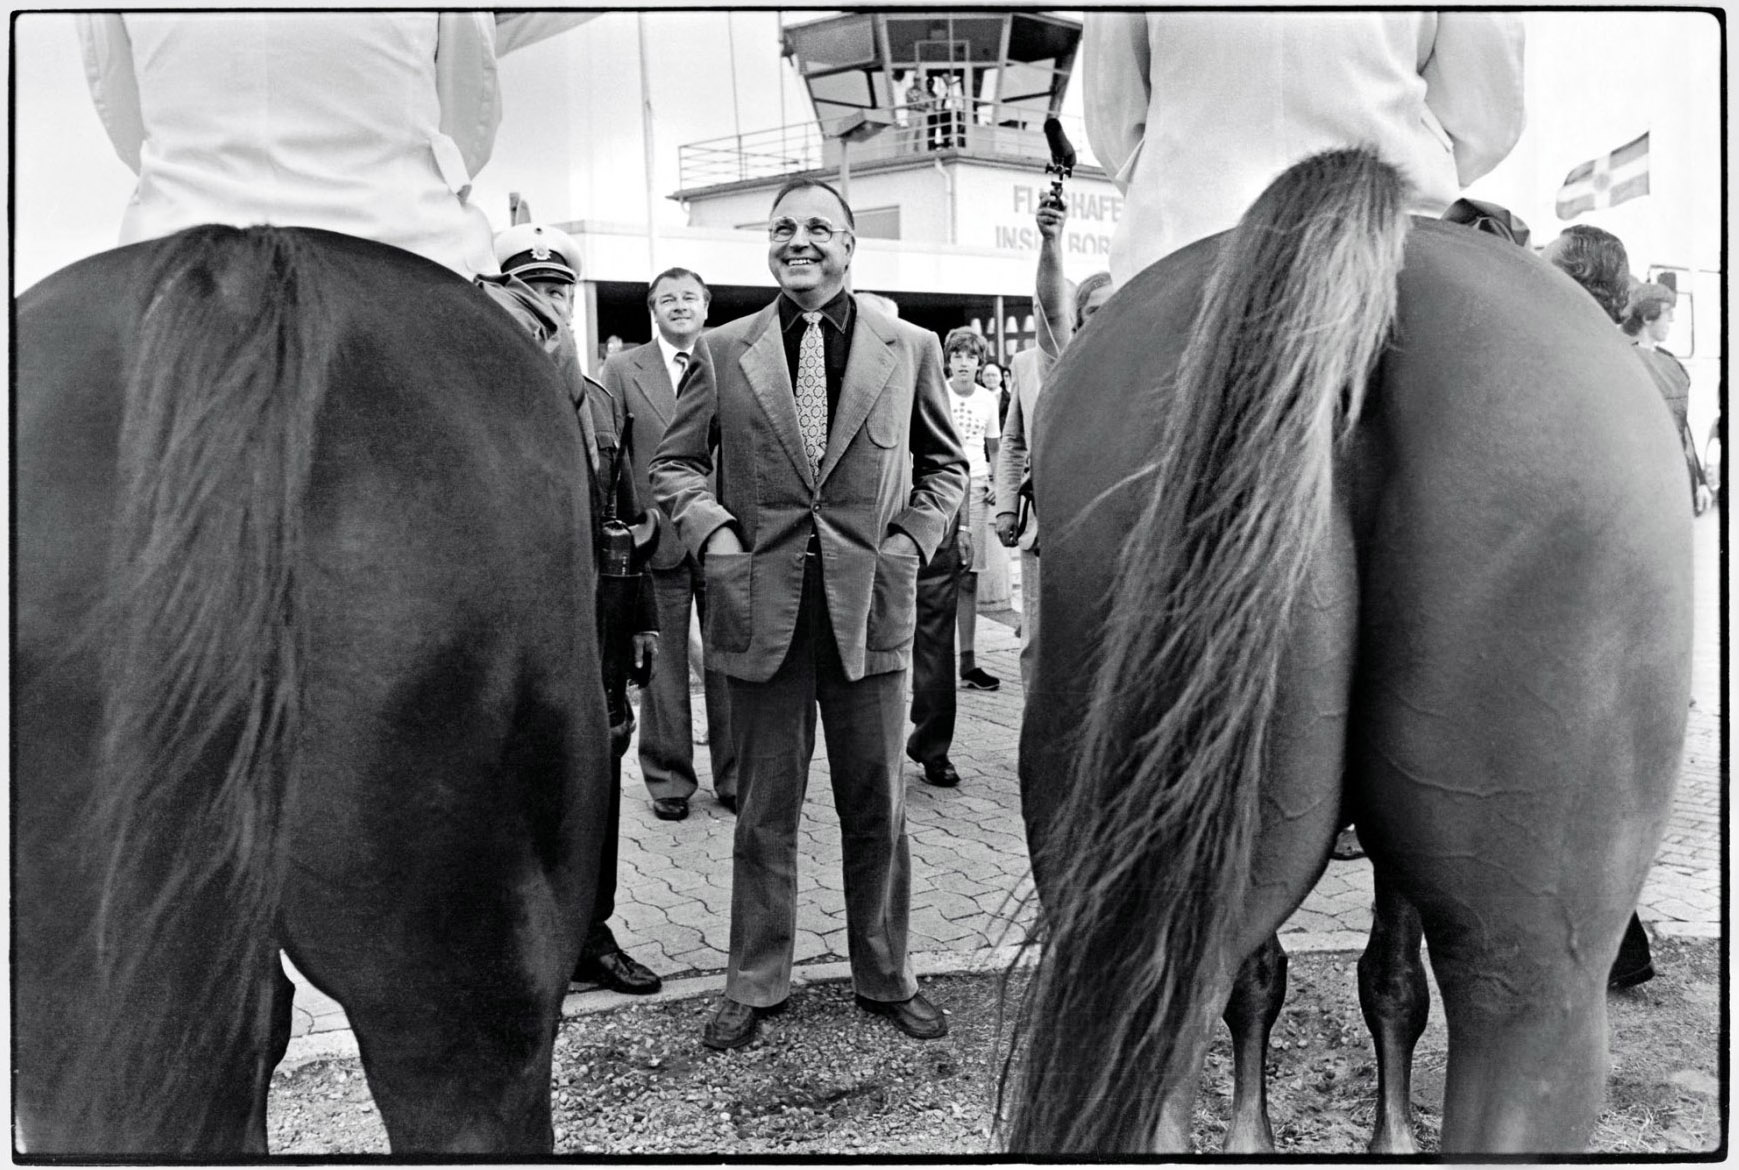 Helmut Kohl at his Campaign Trail, 1976